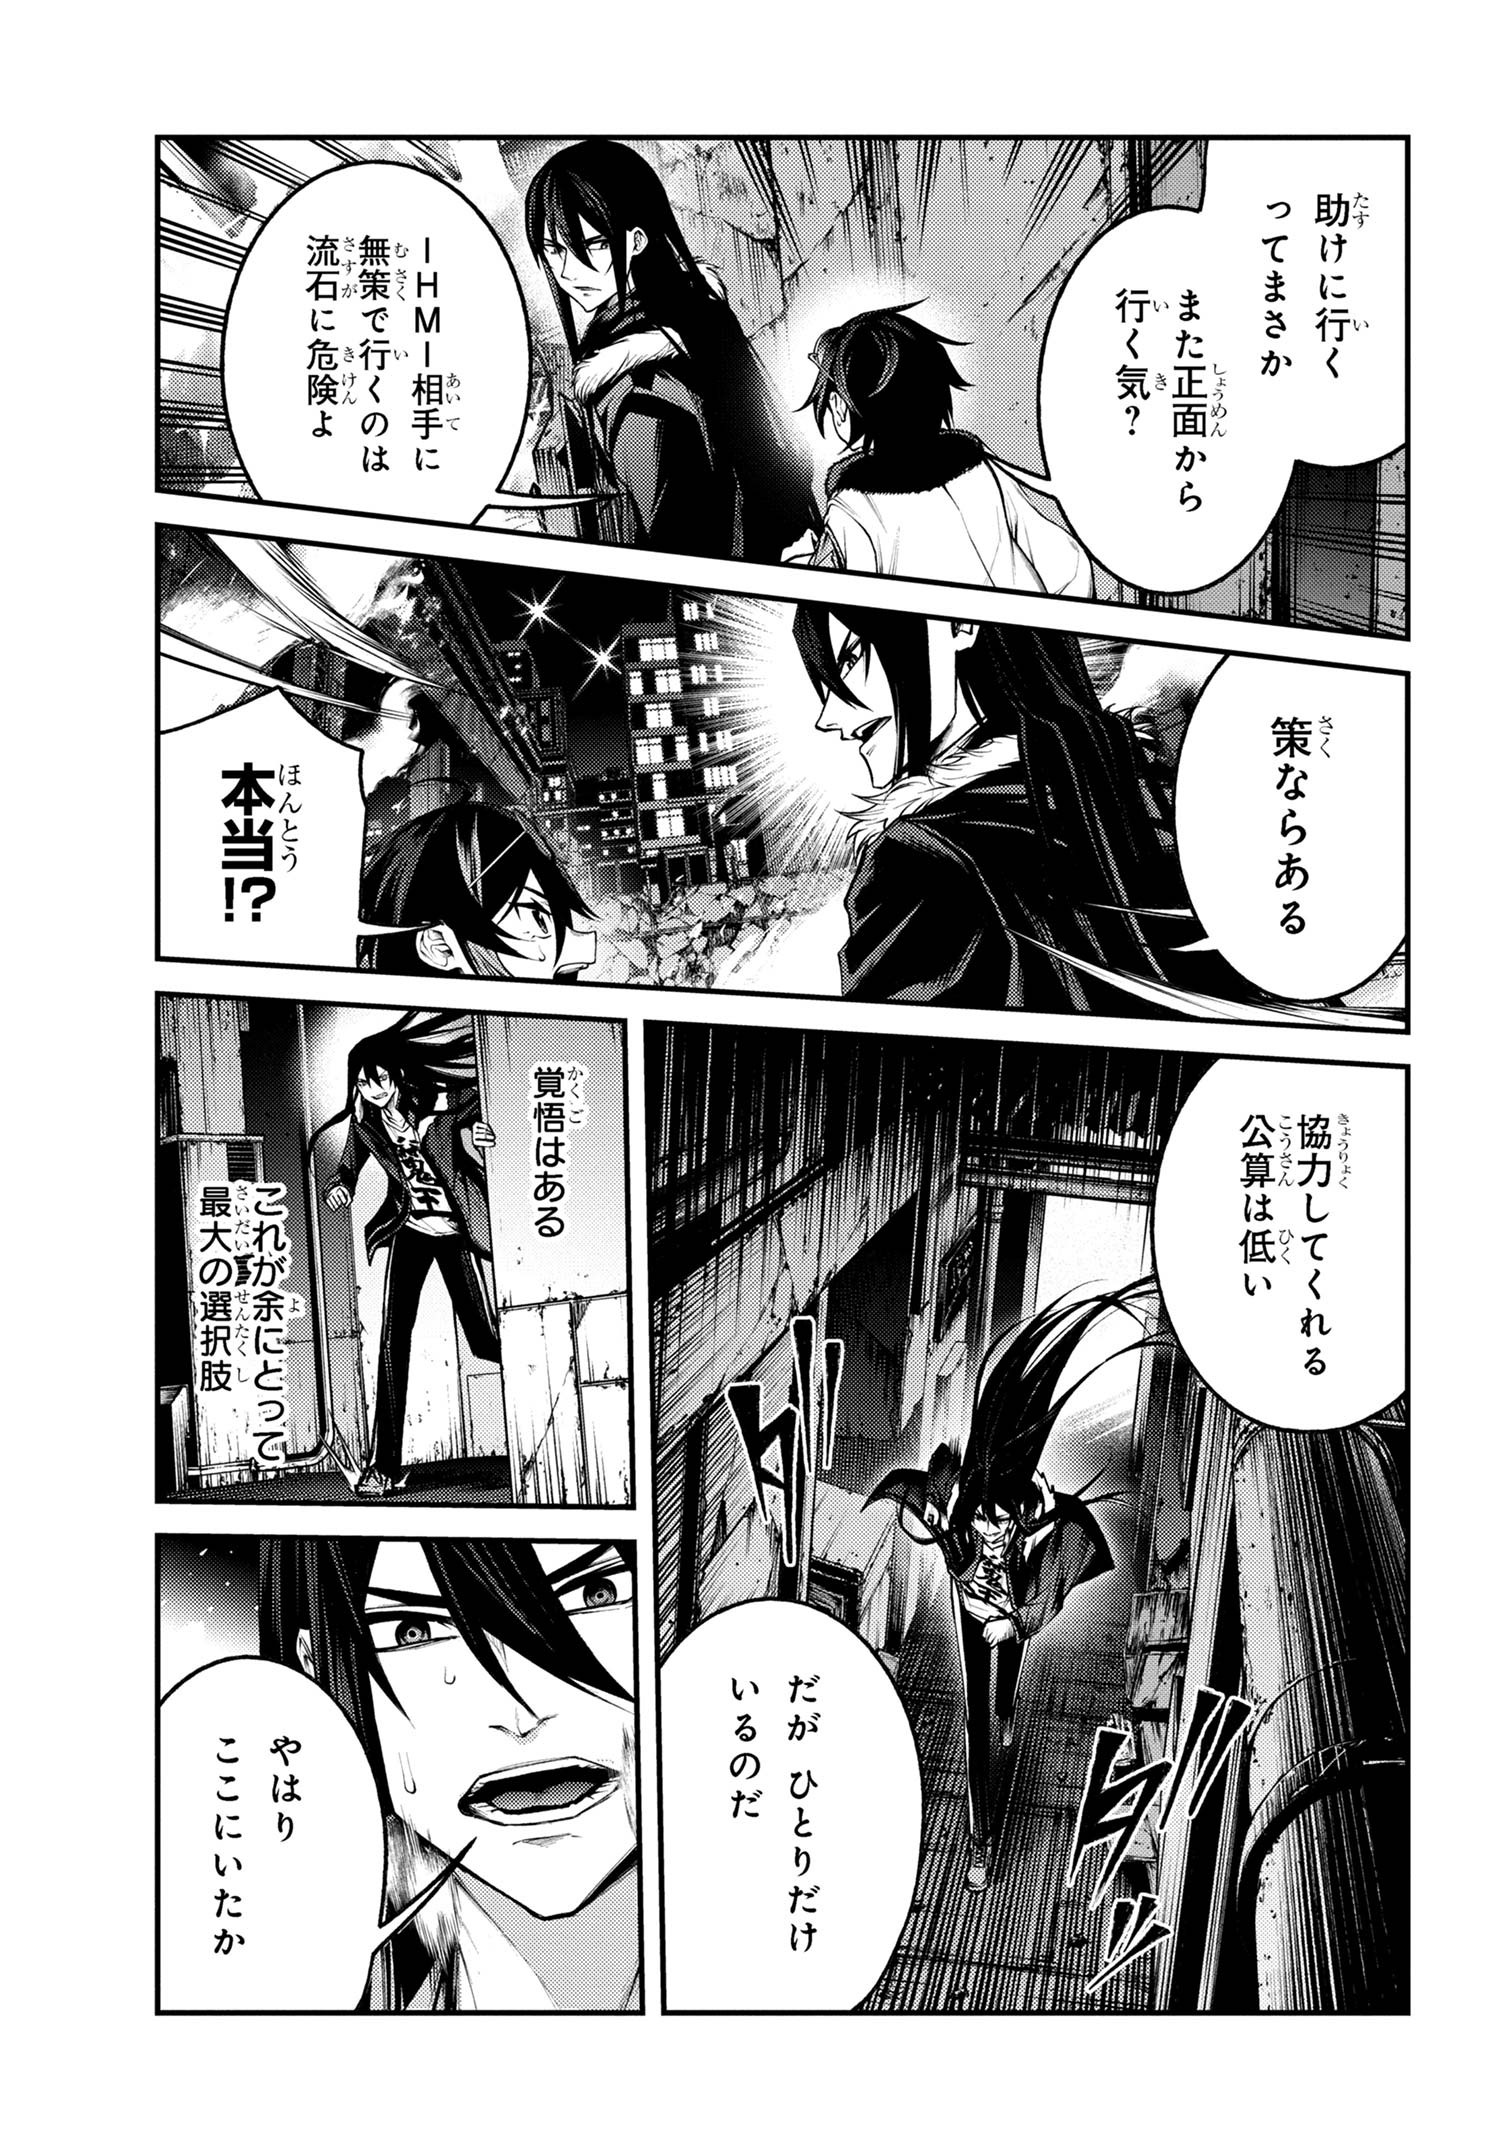 Maou 2099 - Chapter 8.3 - Page 10